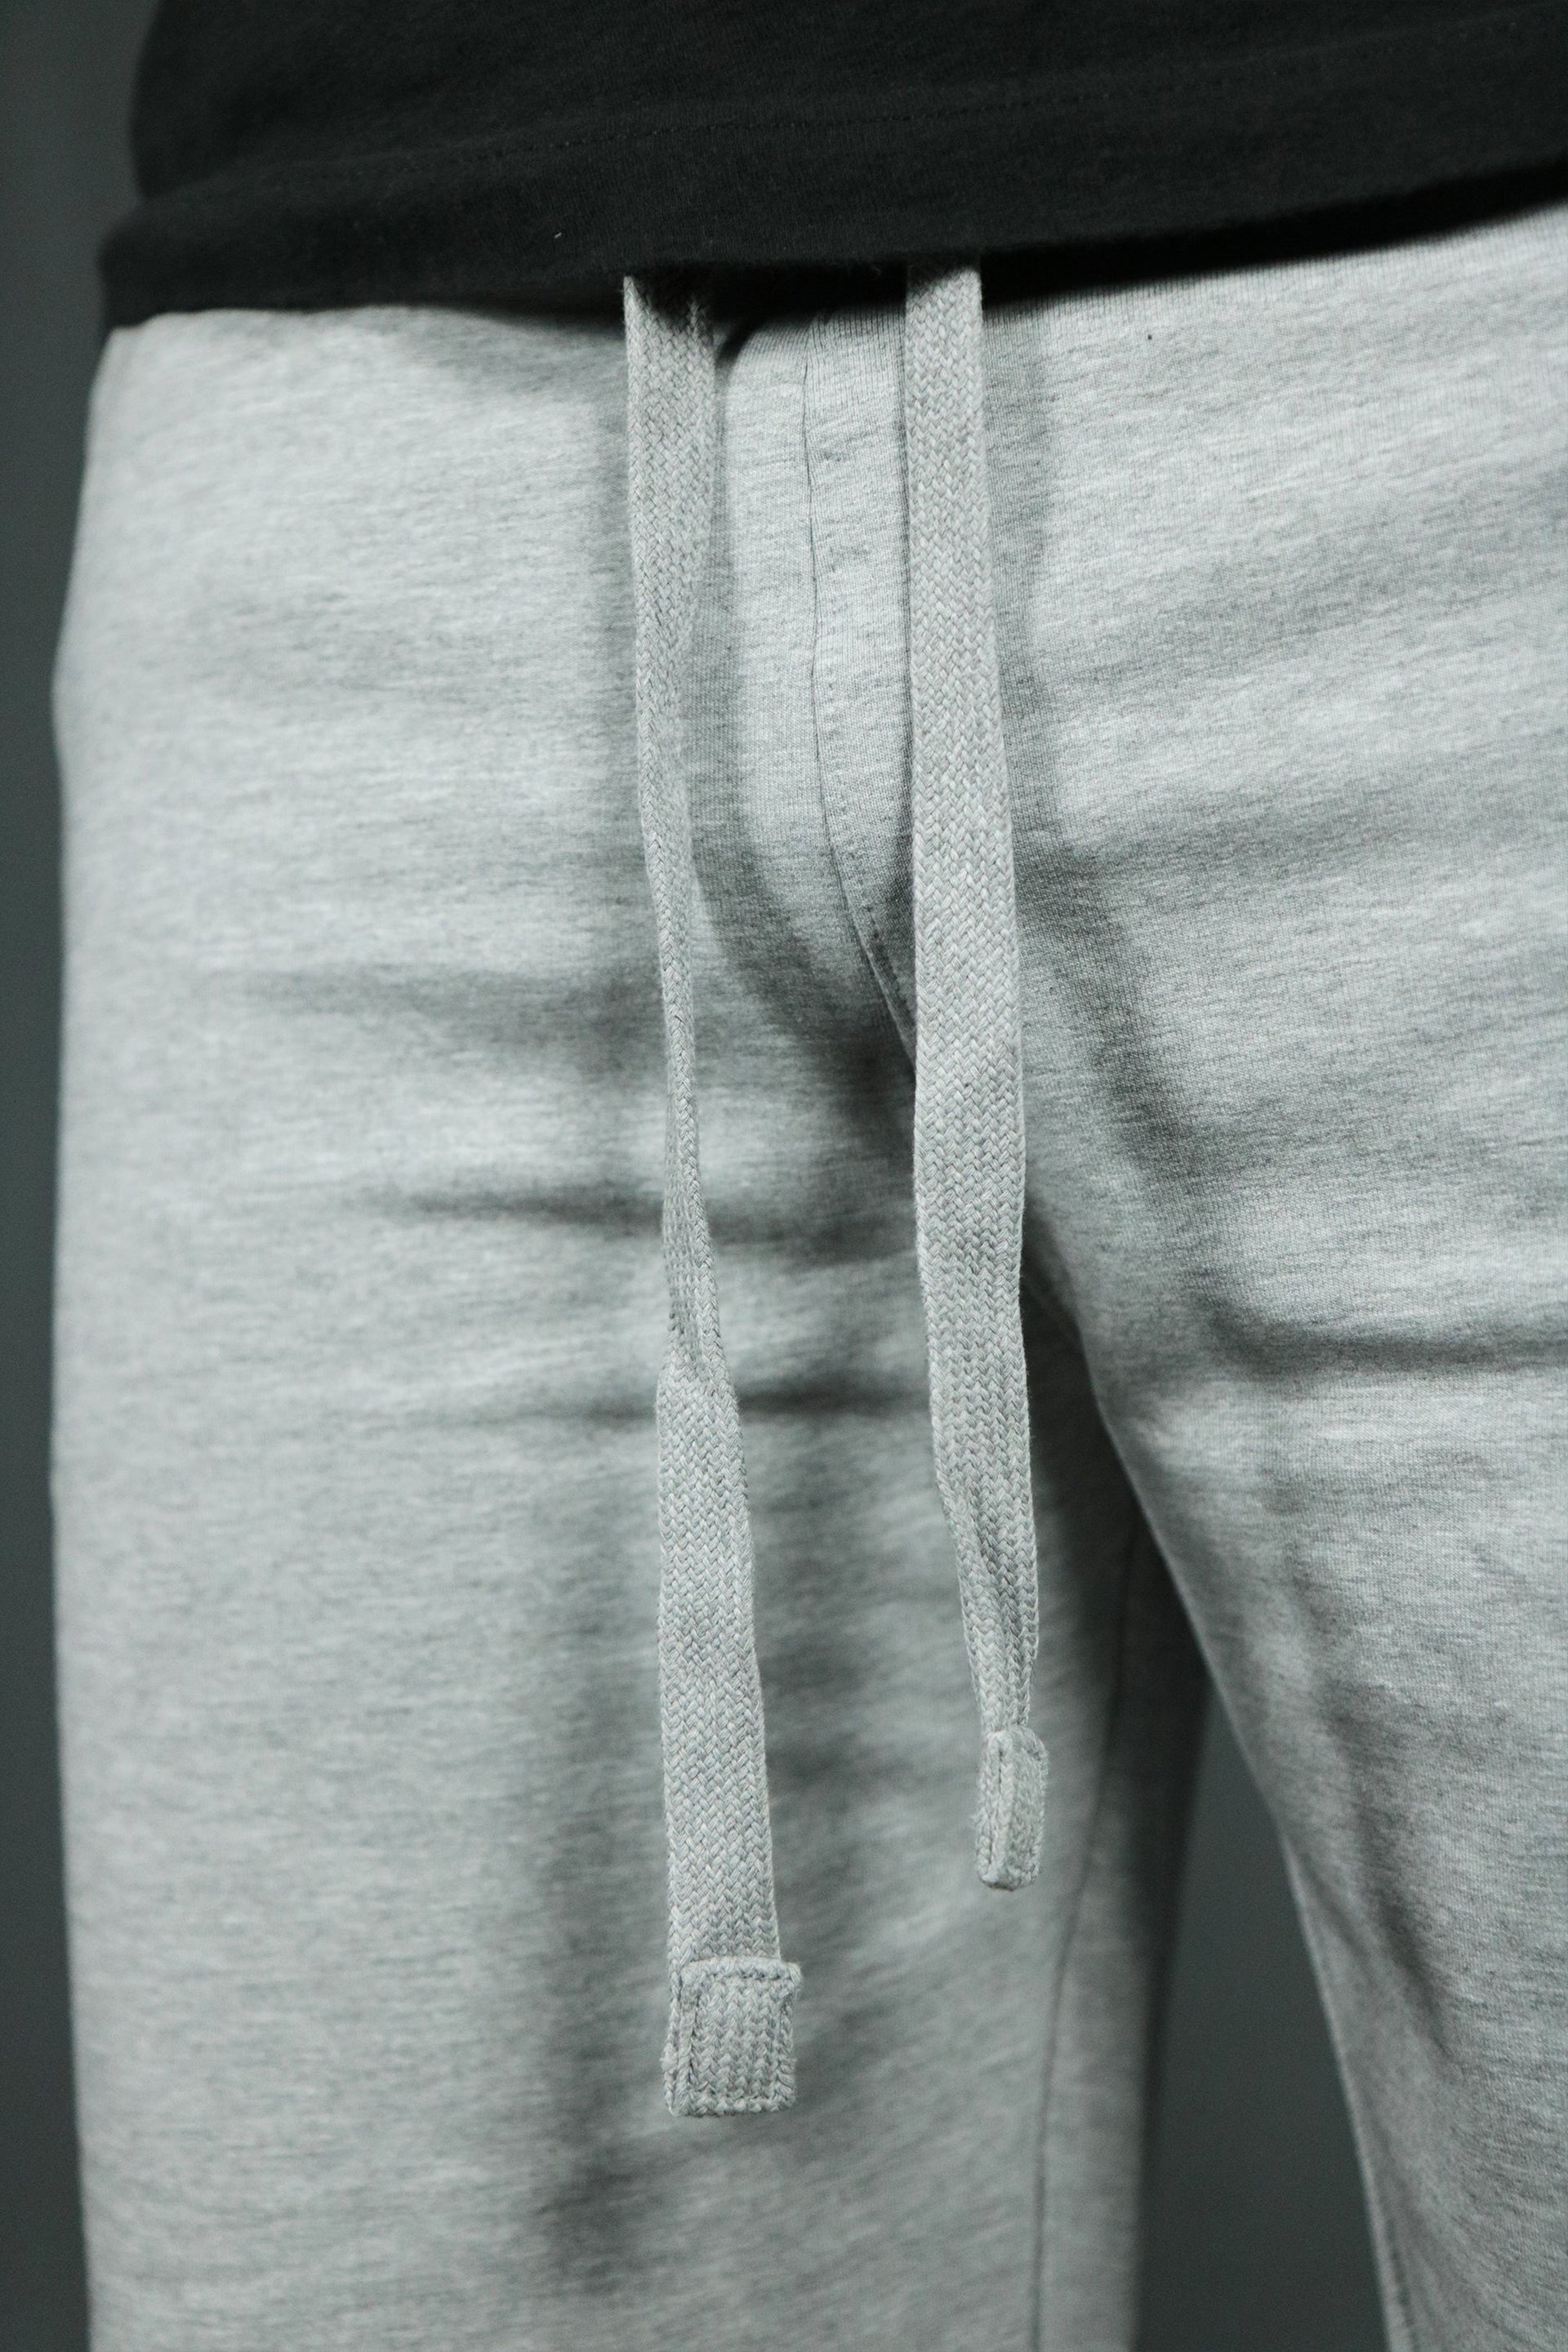 The drawstrings of the heather gray mens terry shorts.